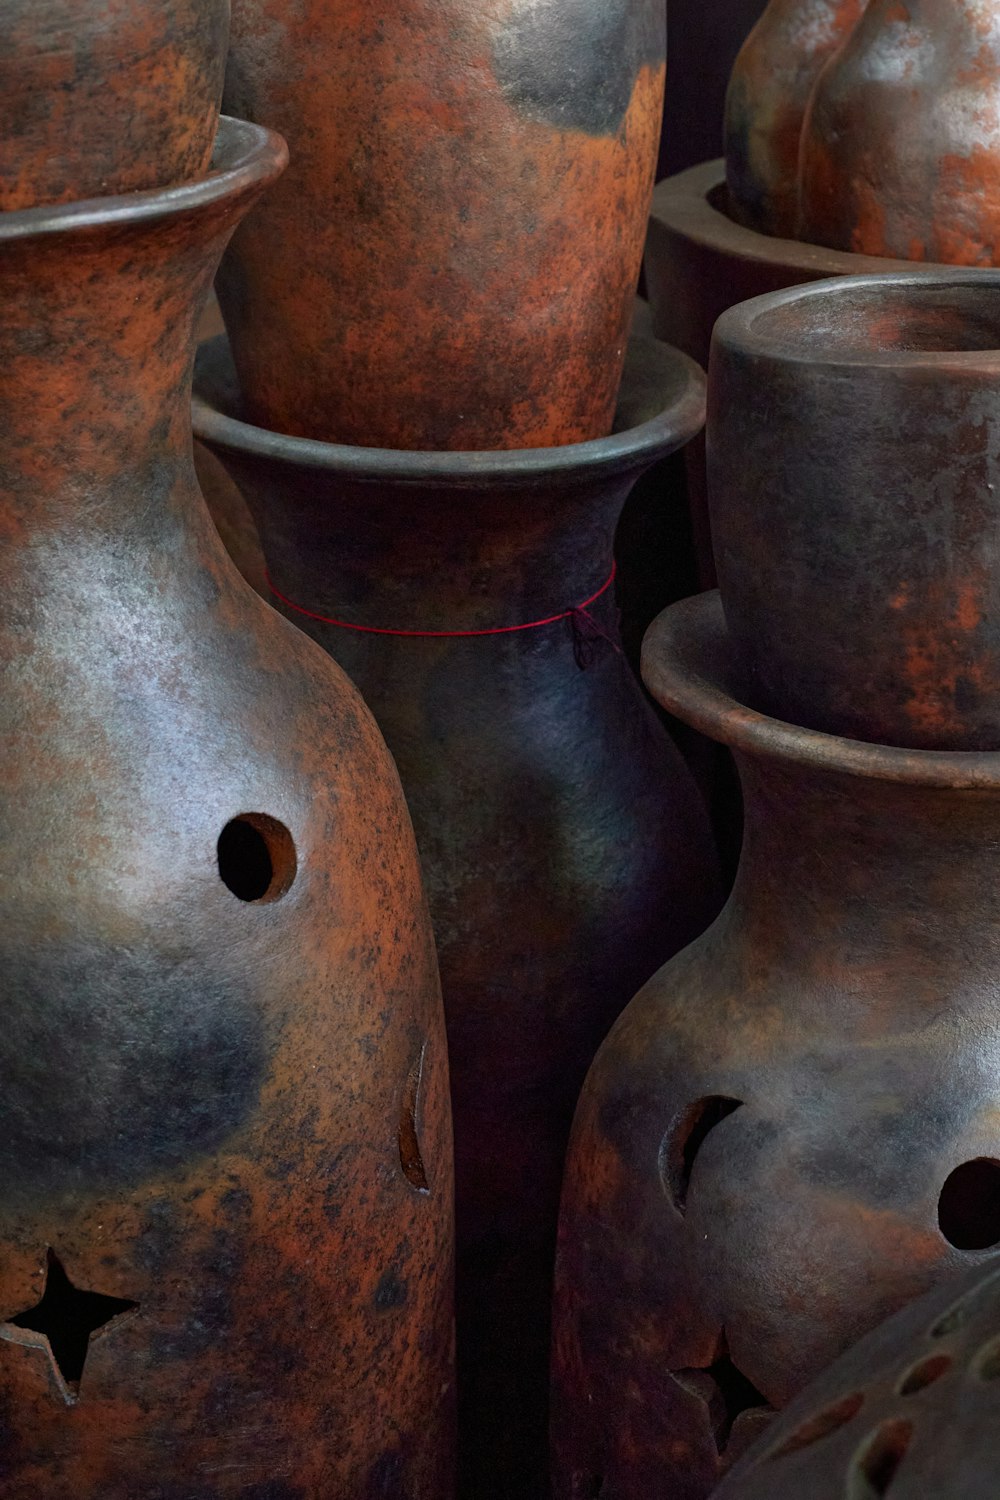 a group of vases sitting next to each other